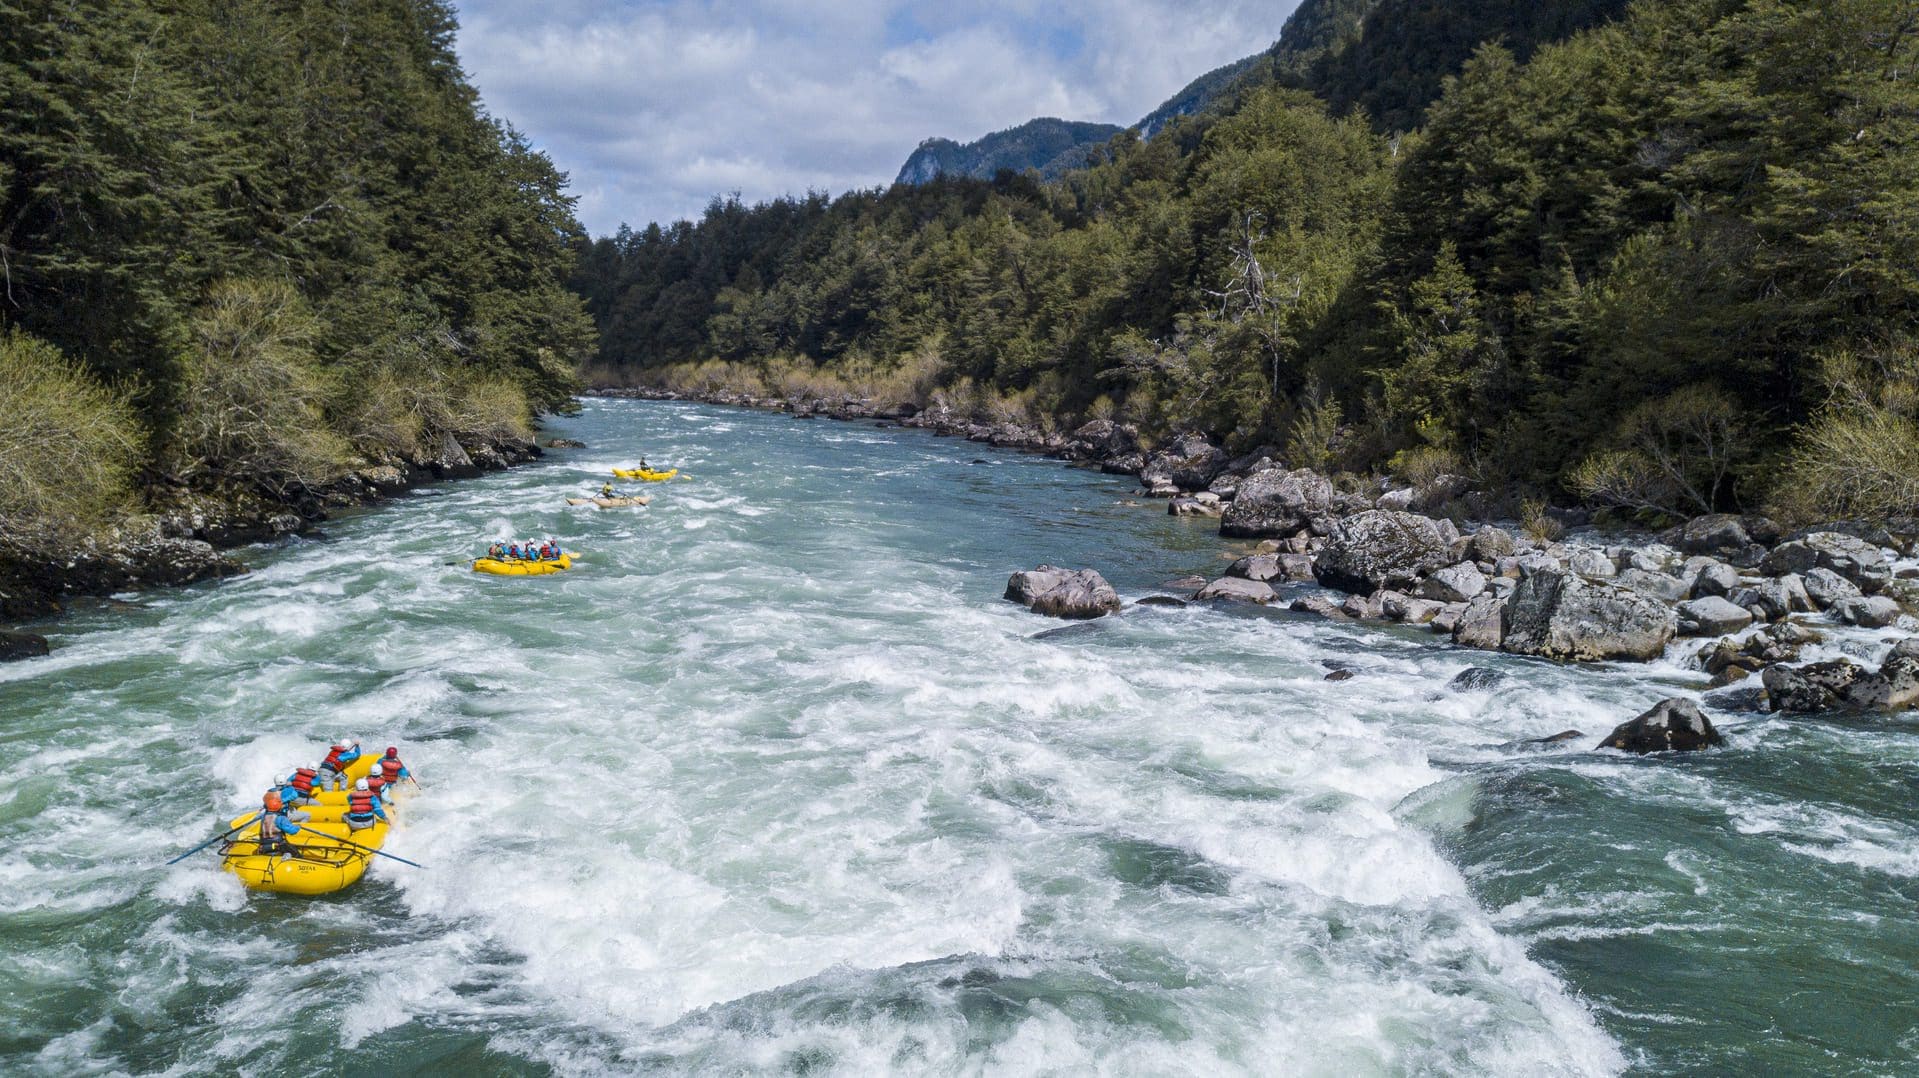 Rafting in Chile